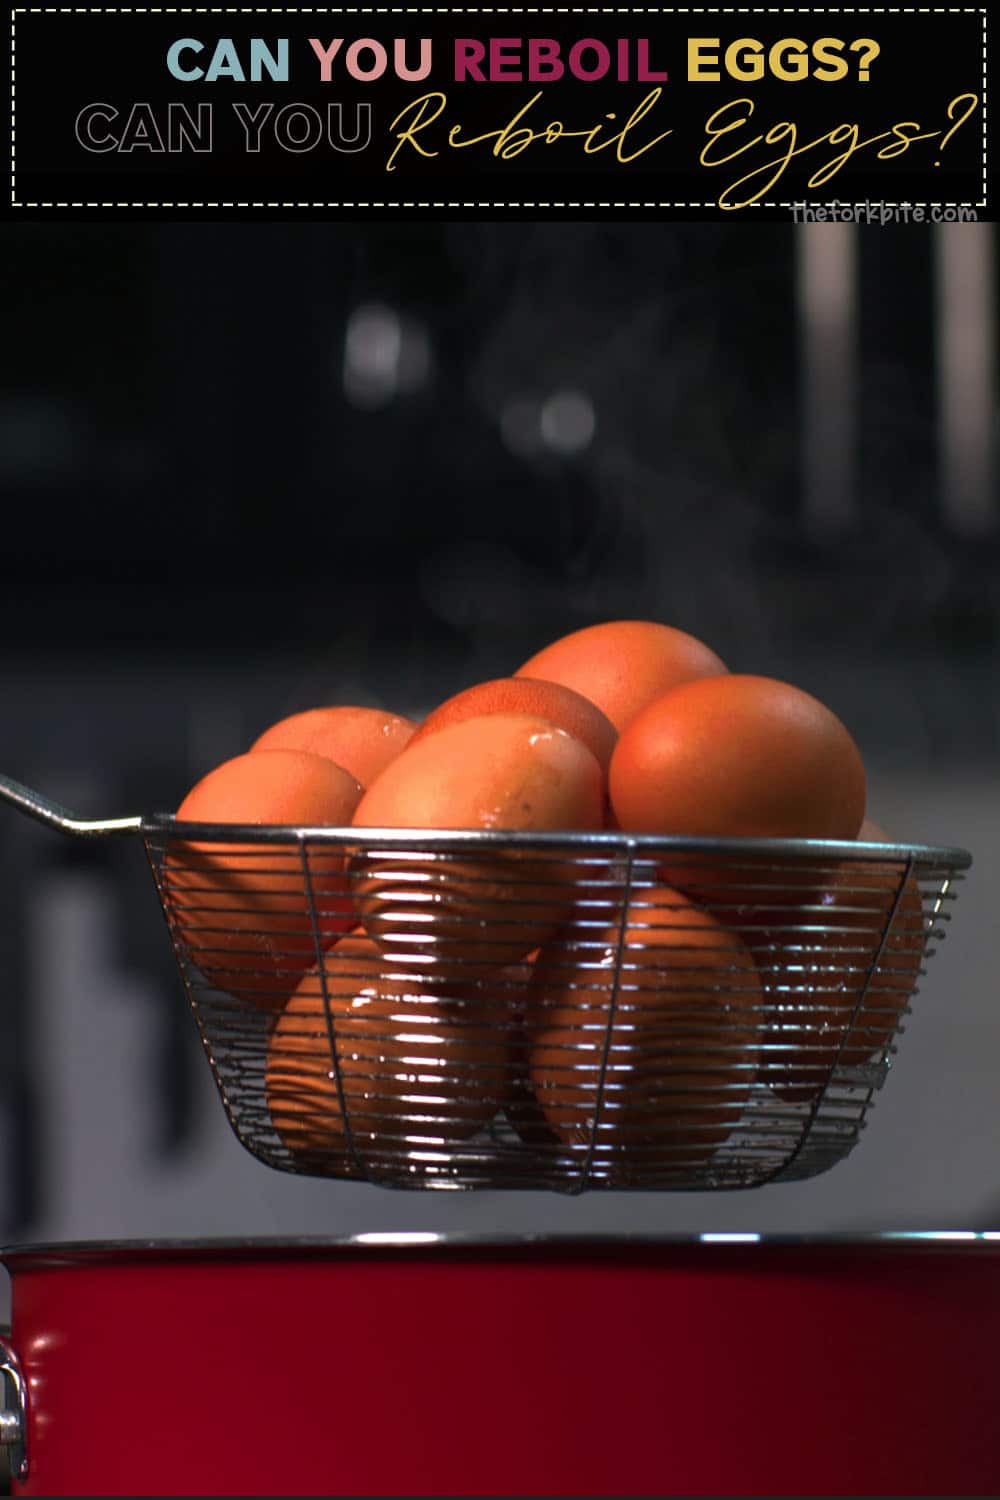 Do you know whether or not it is safe to re-boil eggs if they've been previously parboiled? How about putting eggs in the microwave?